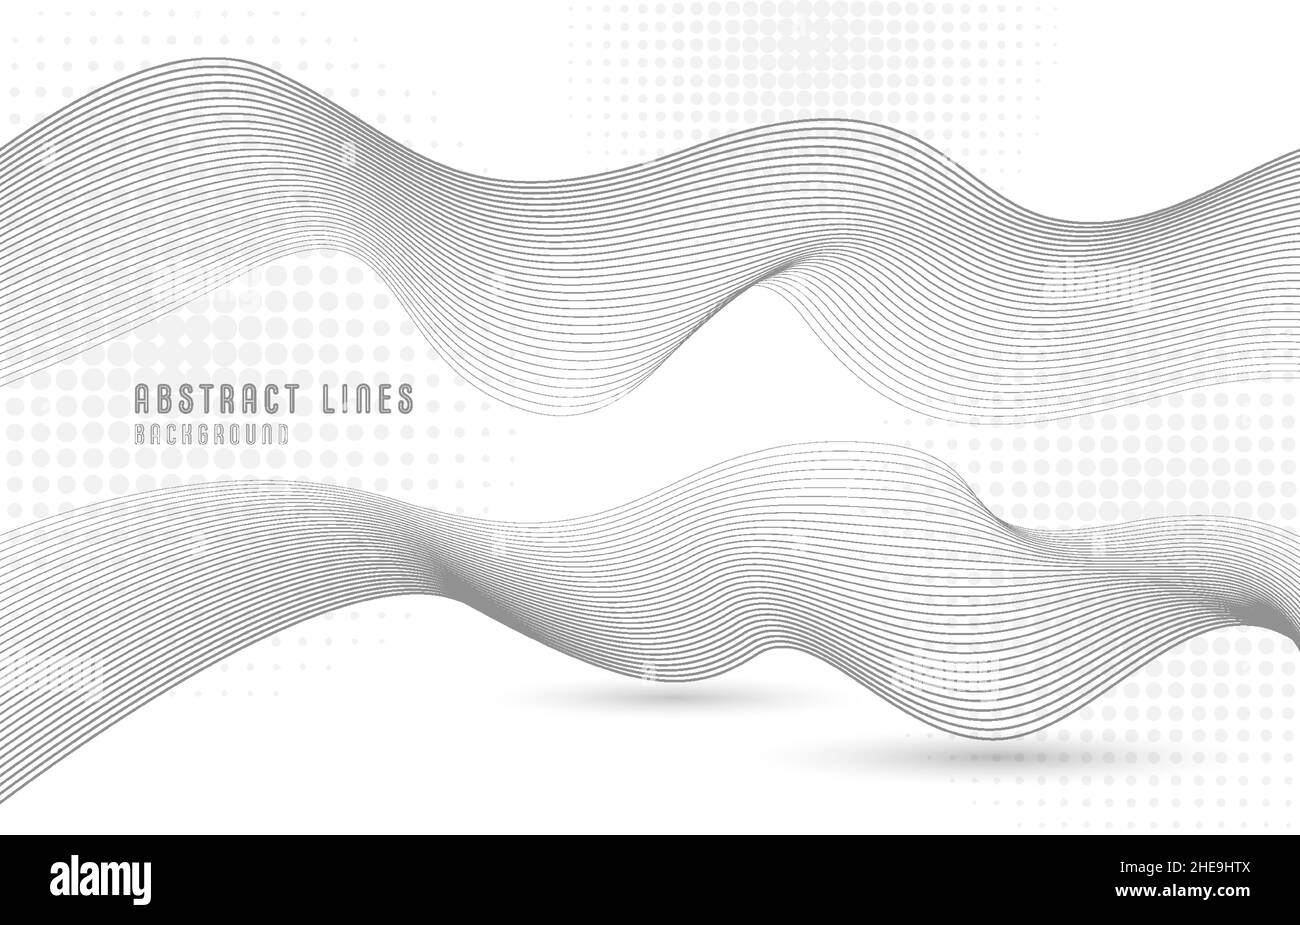 Abstract lines pattern artwork decorative style template. Overlapping for cover artwork style background. Illustration vector Stock Vector